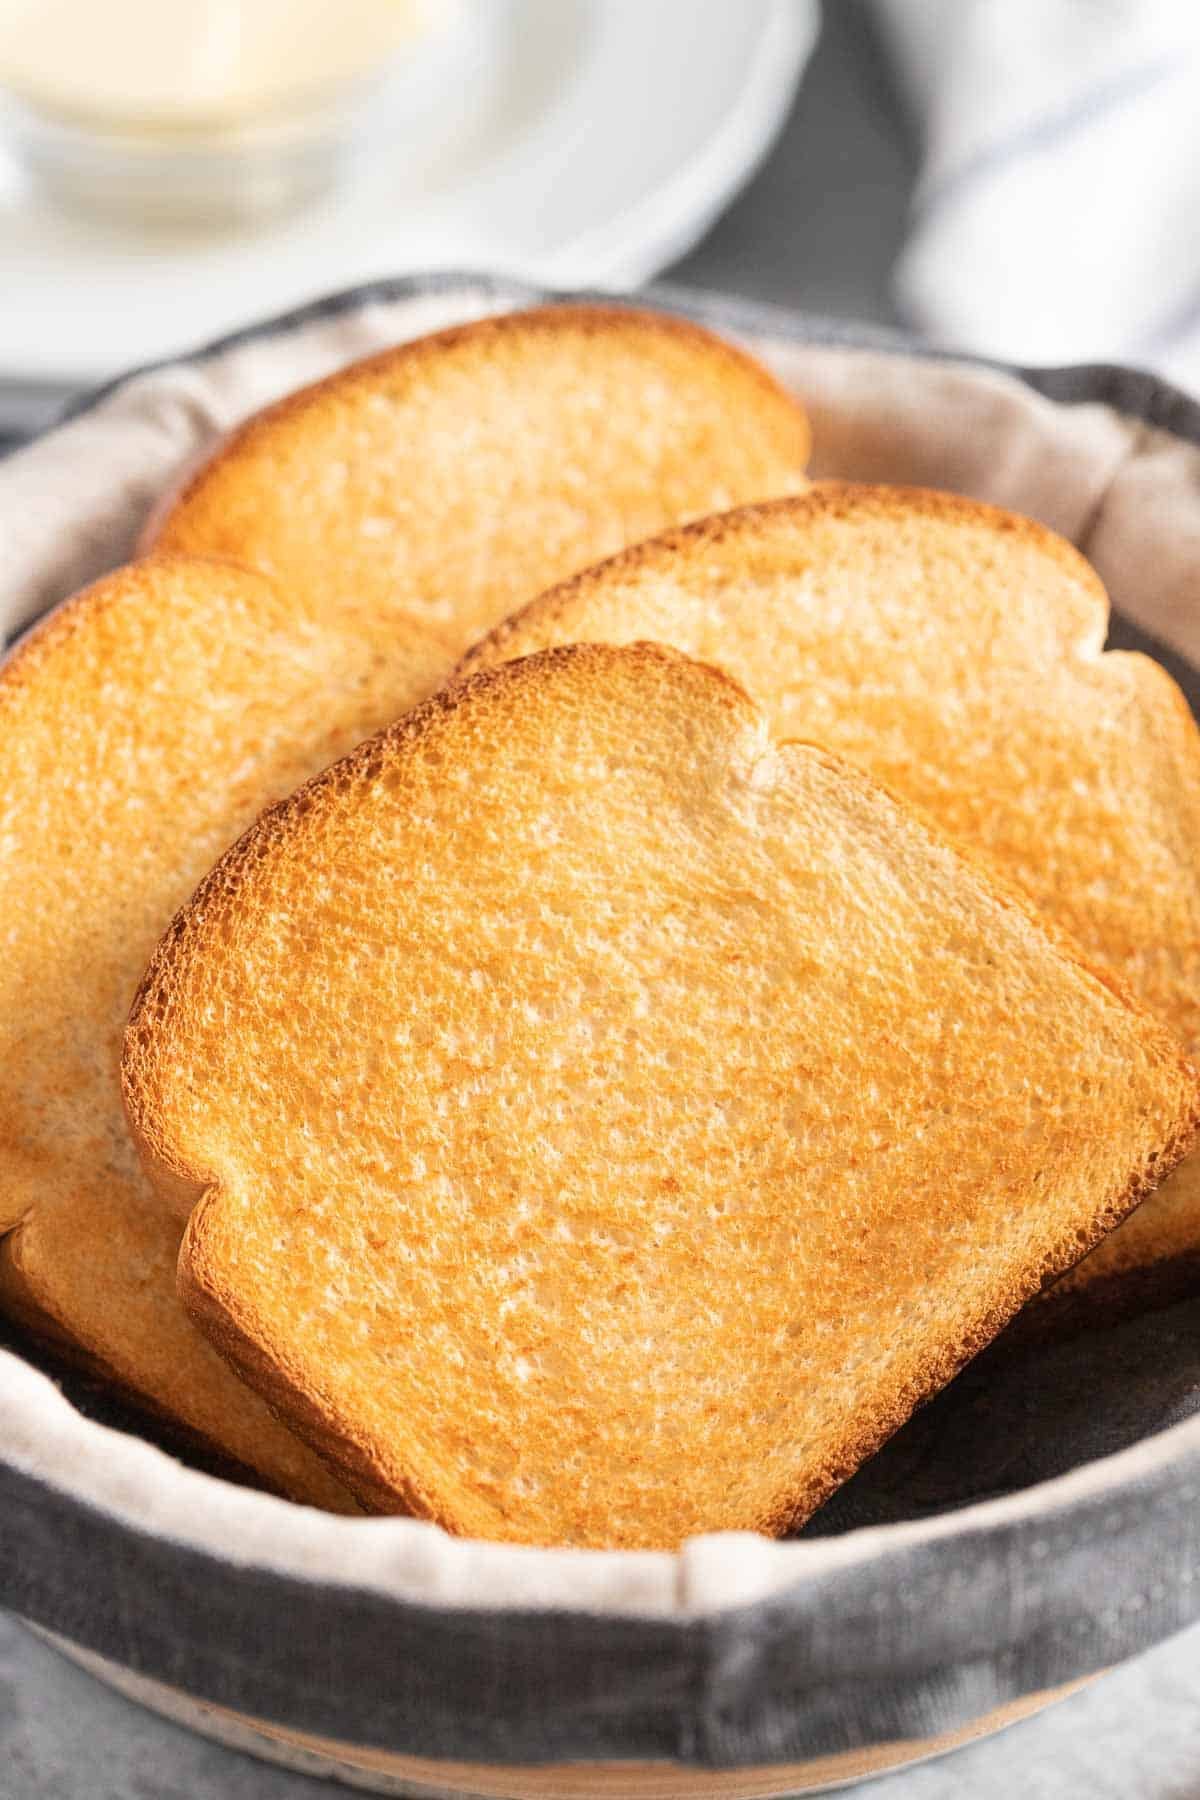 Toasted bread in a bread basket.